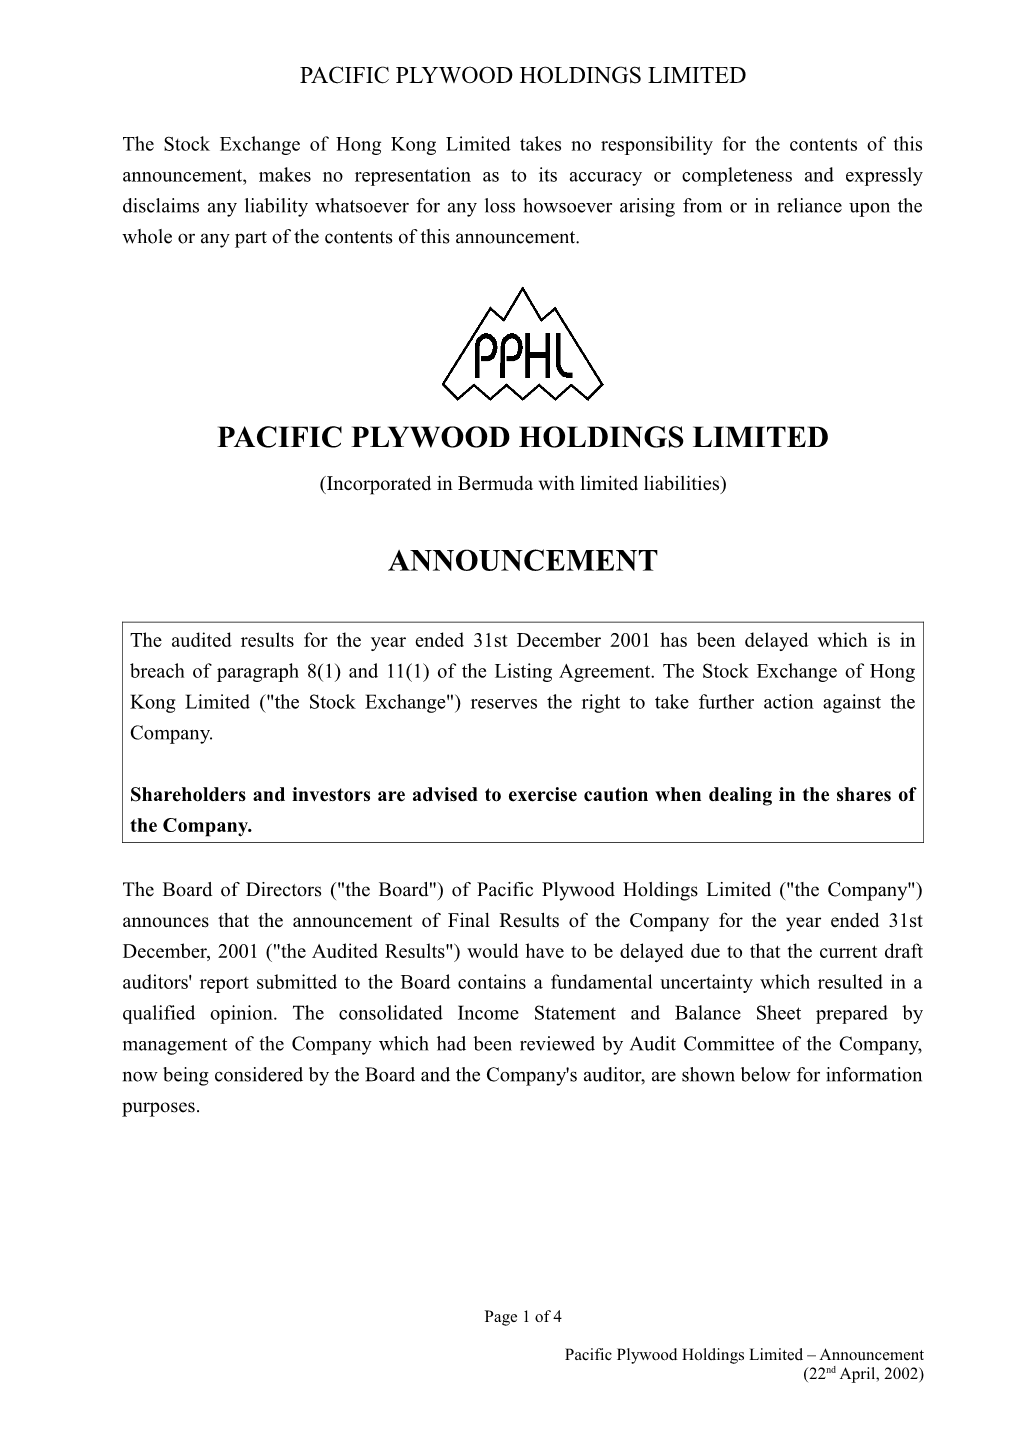 PACIFIC PLYWOOD 00767 - Announcement